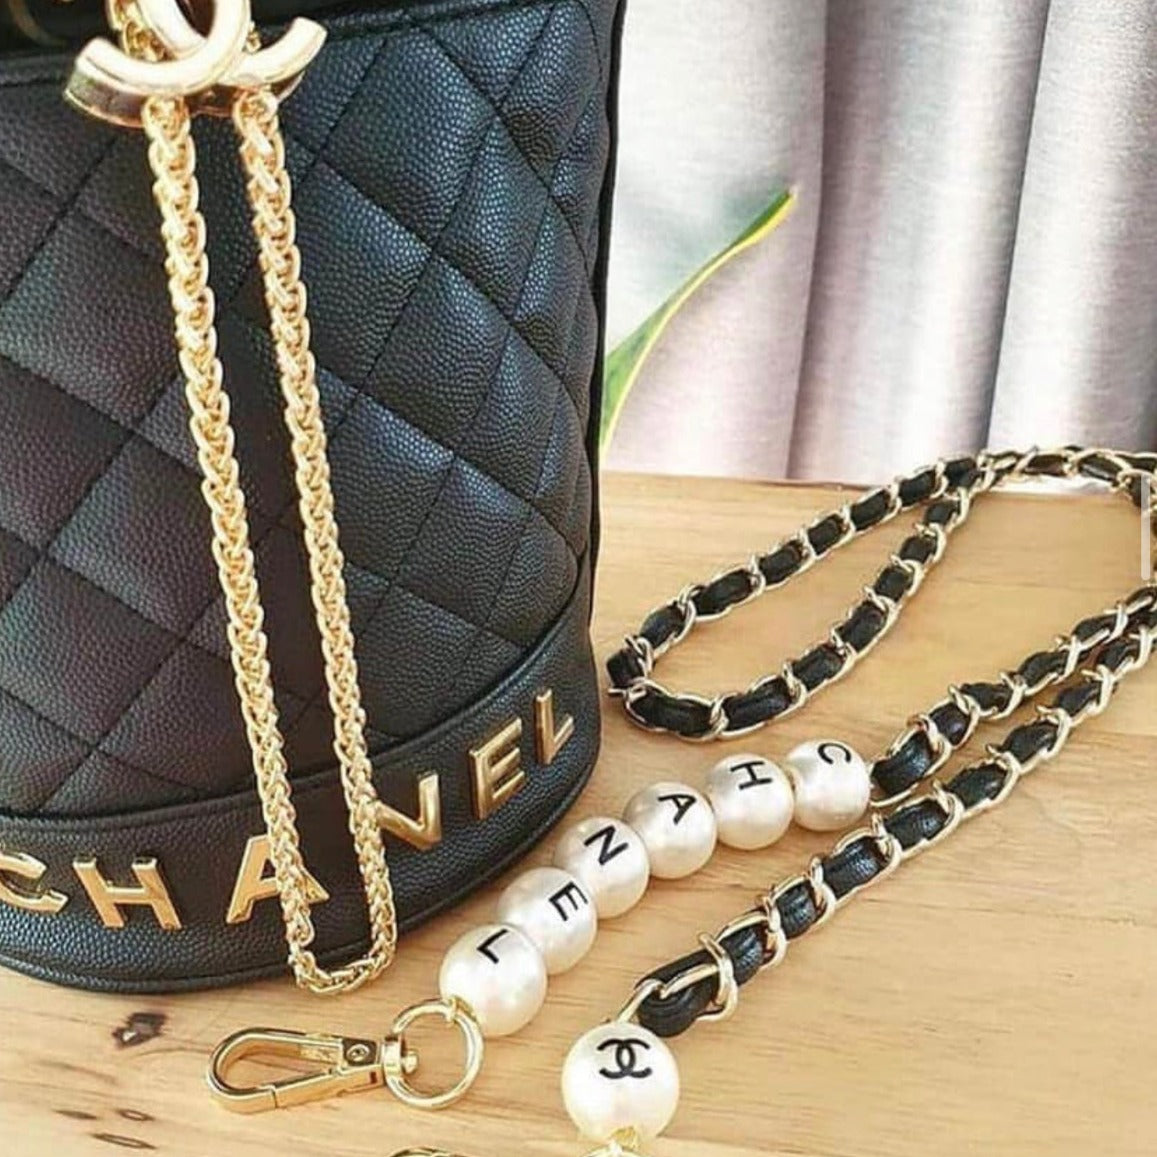 Simplybranded - Chanel VIP Gift Bucket Bag Php 11k only